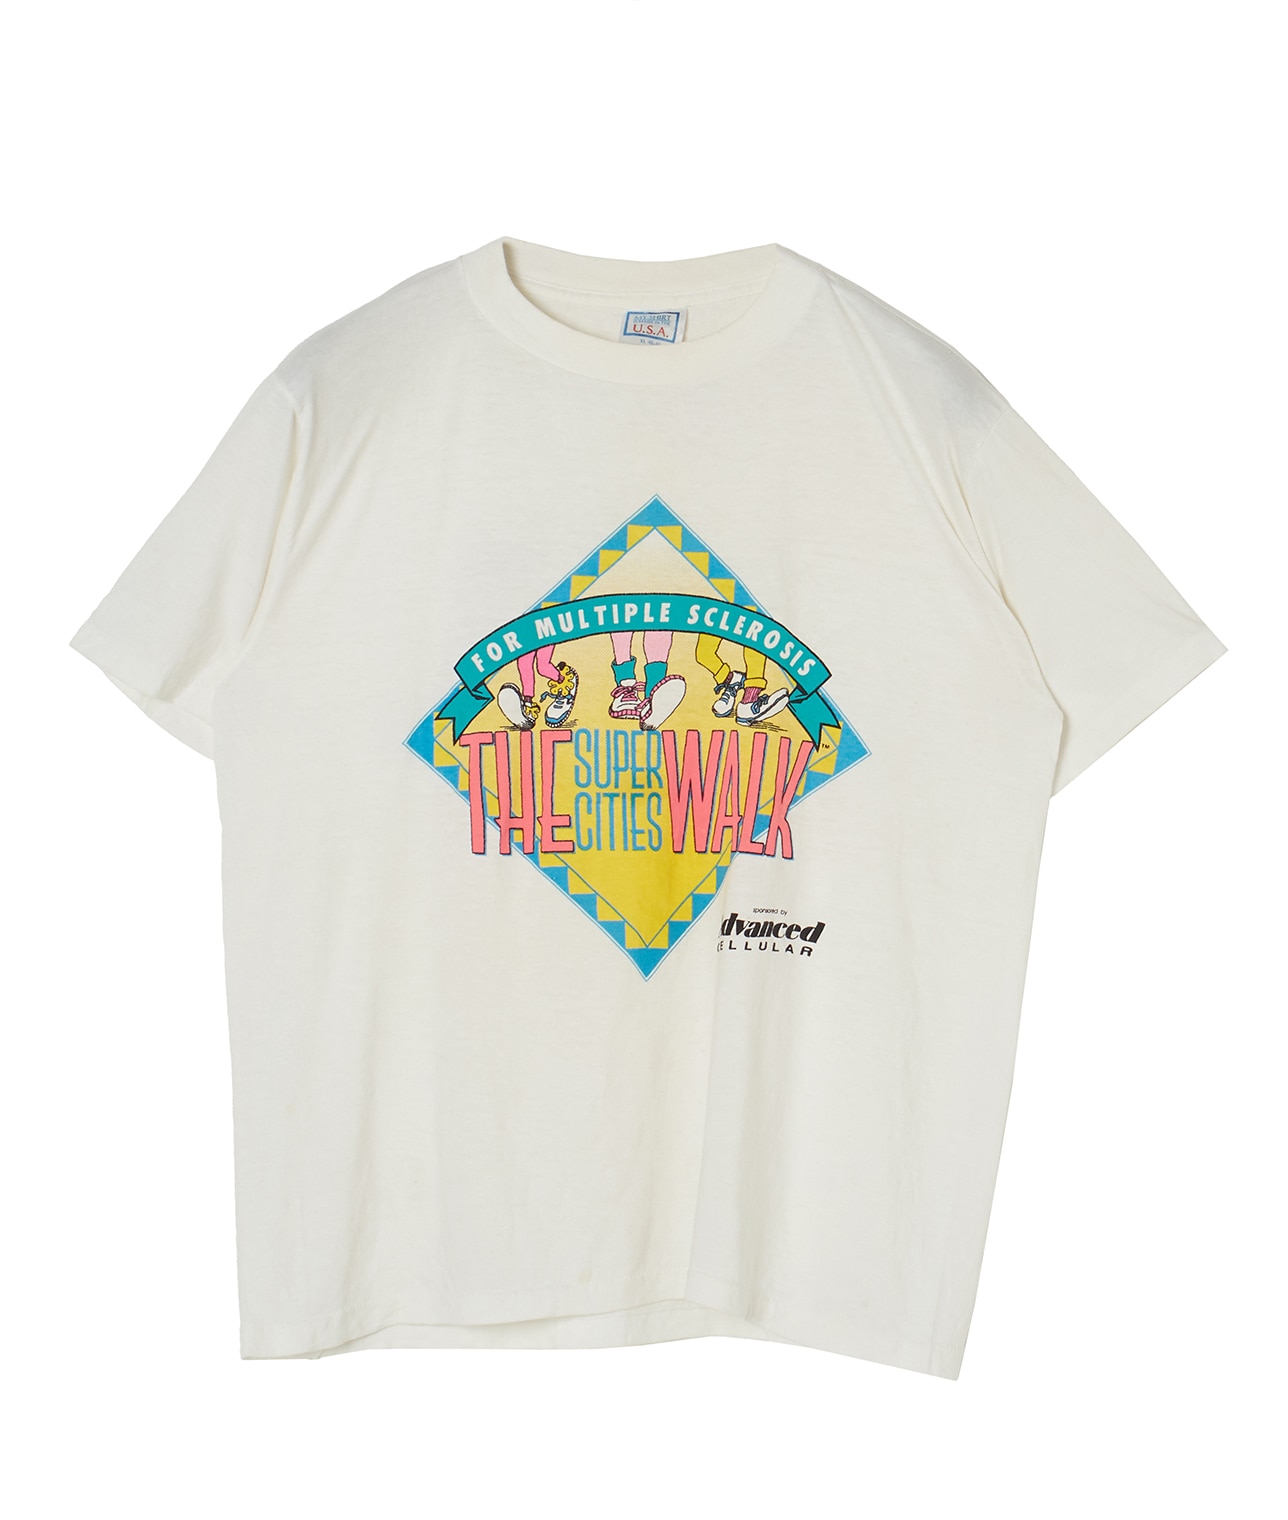 USED/THE SUPER CITIES WALK/プリントTシャツ 詳細画像 WHITE 1